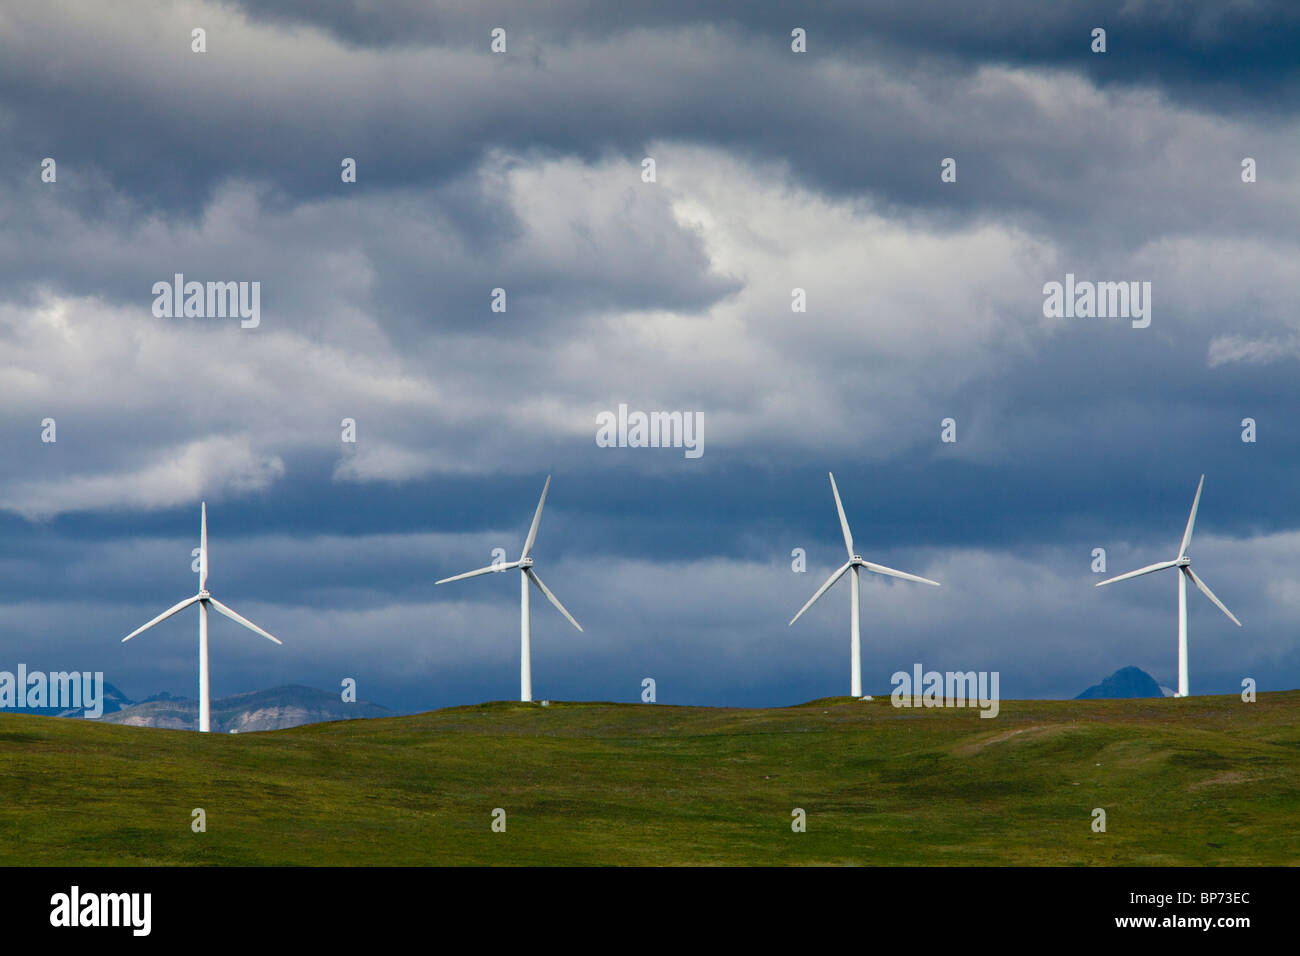 Windmills at Pincher Creek, Alberta, with the Rockies beyond, in stormy weather; Canada Stock Photo